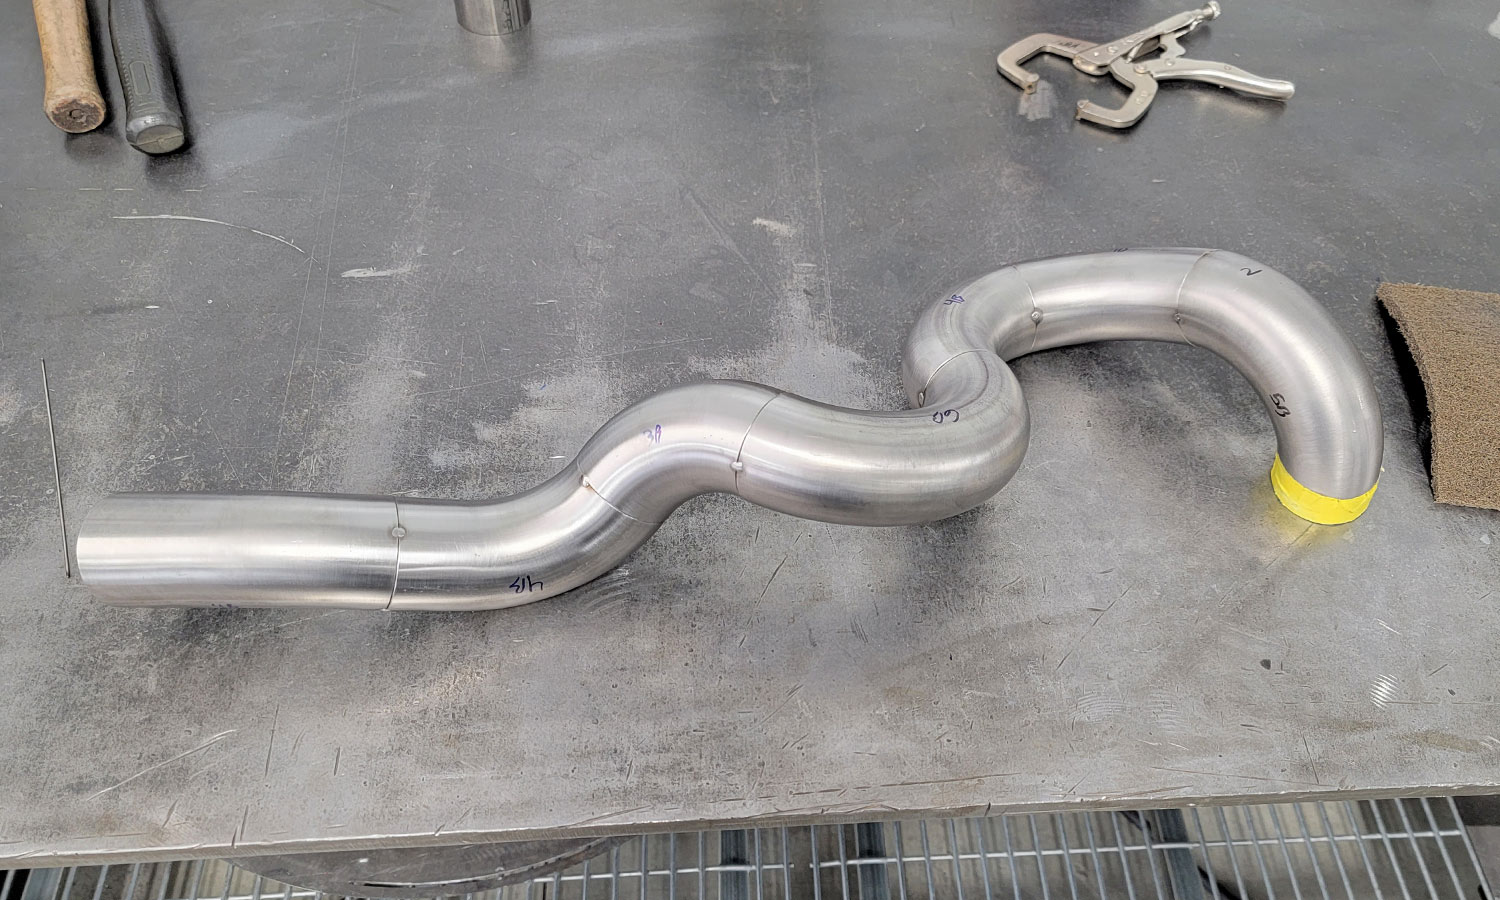 Header tube laying on table